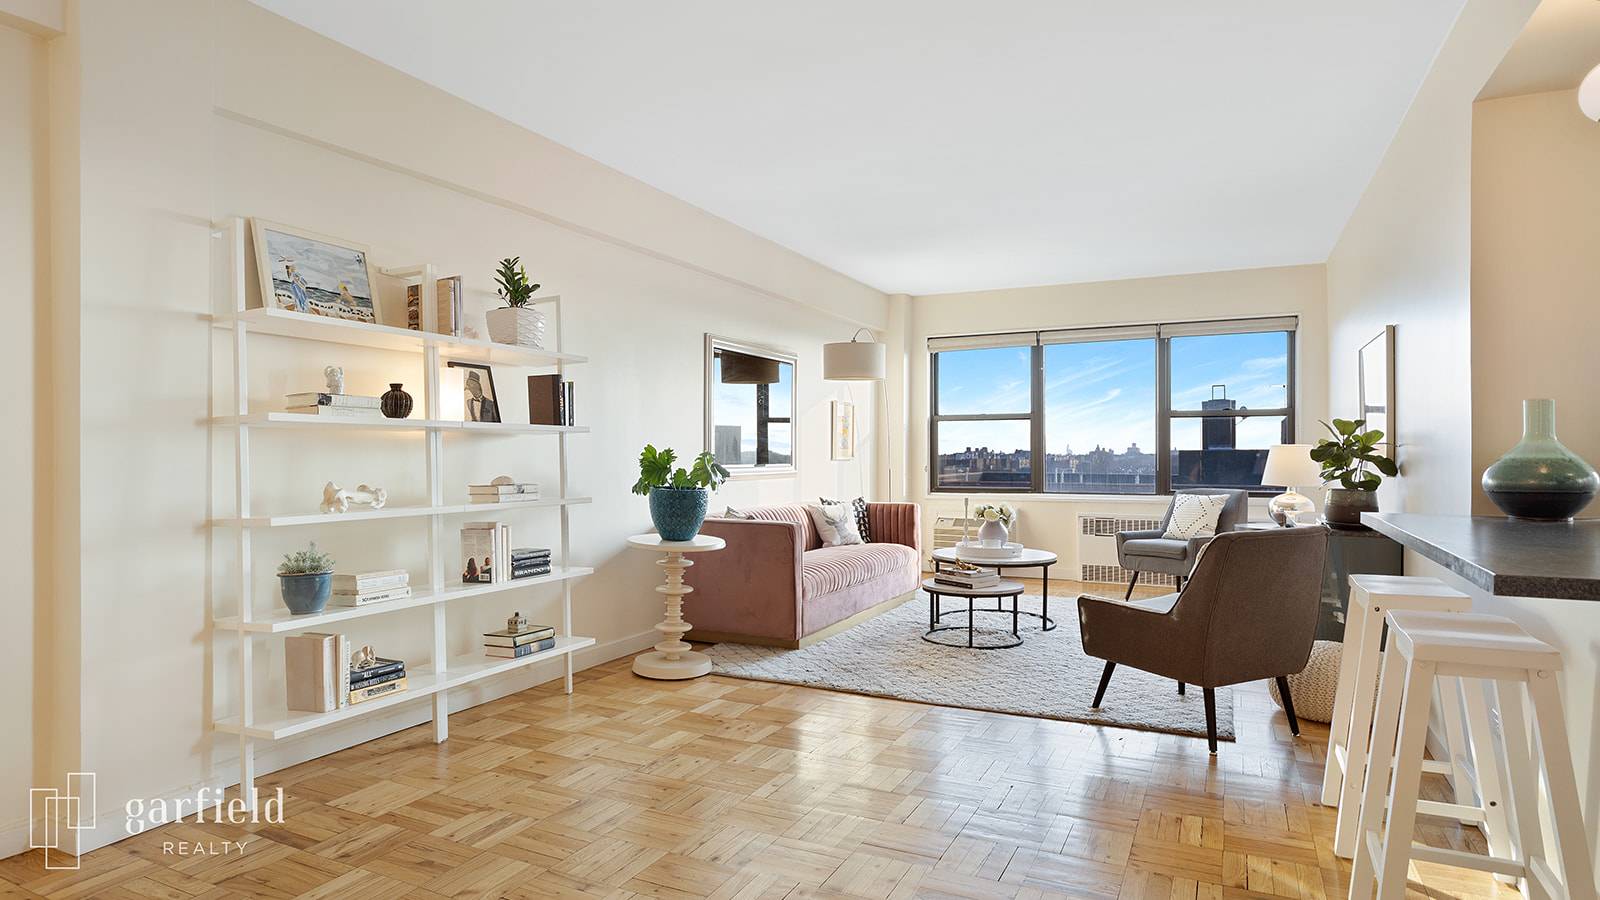 This beautiful, sprawling, sun filled 2BR is perched on a high floor in a coveted elevator doorman building.